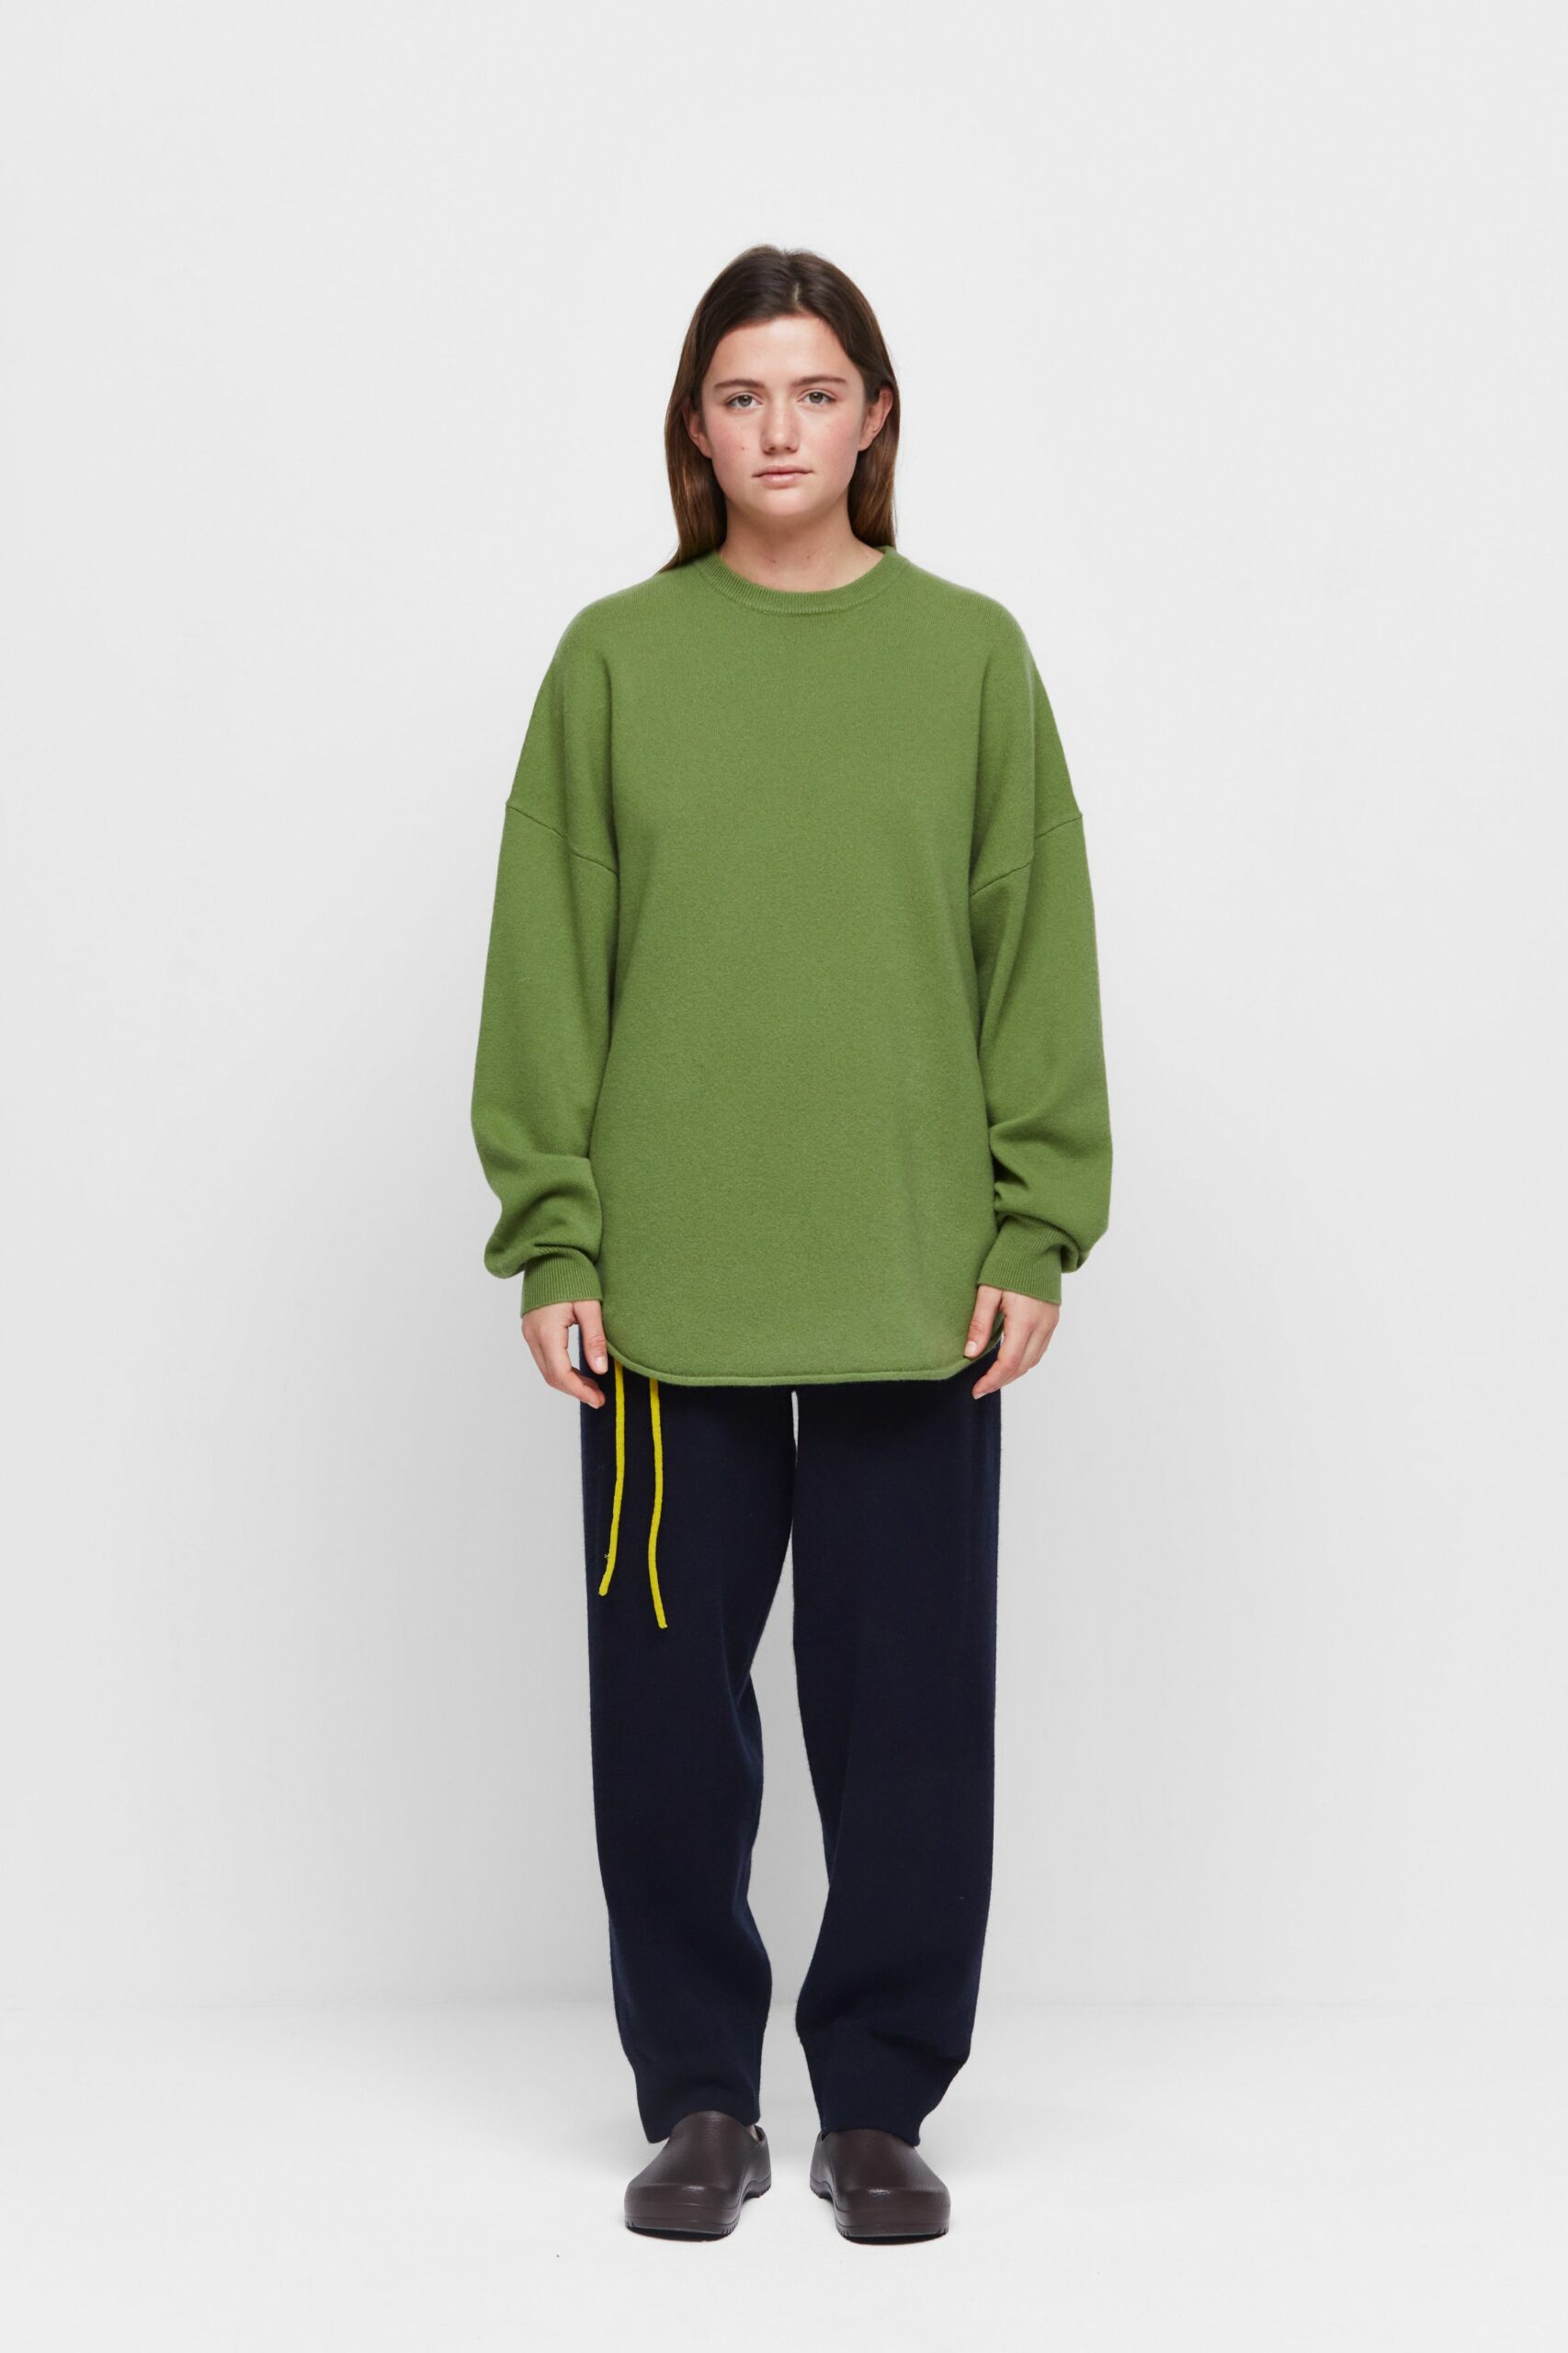 Pullover, N 53, crew hop, extreme cashmere, sweater